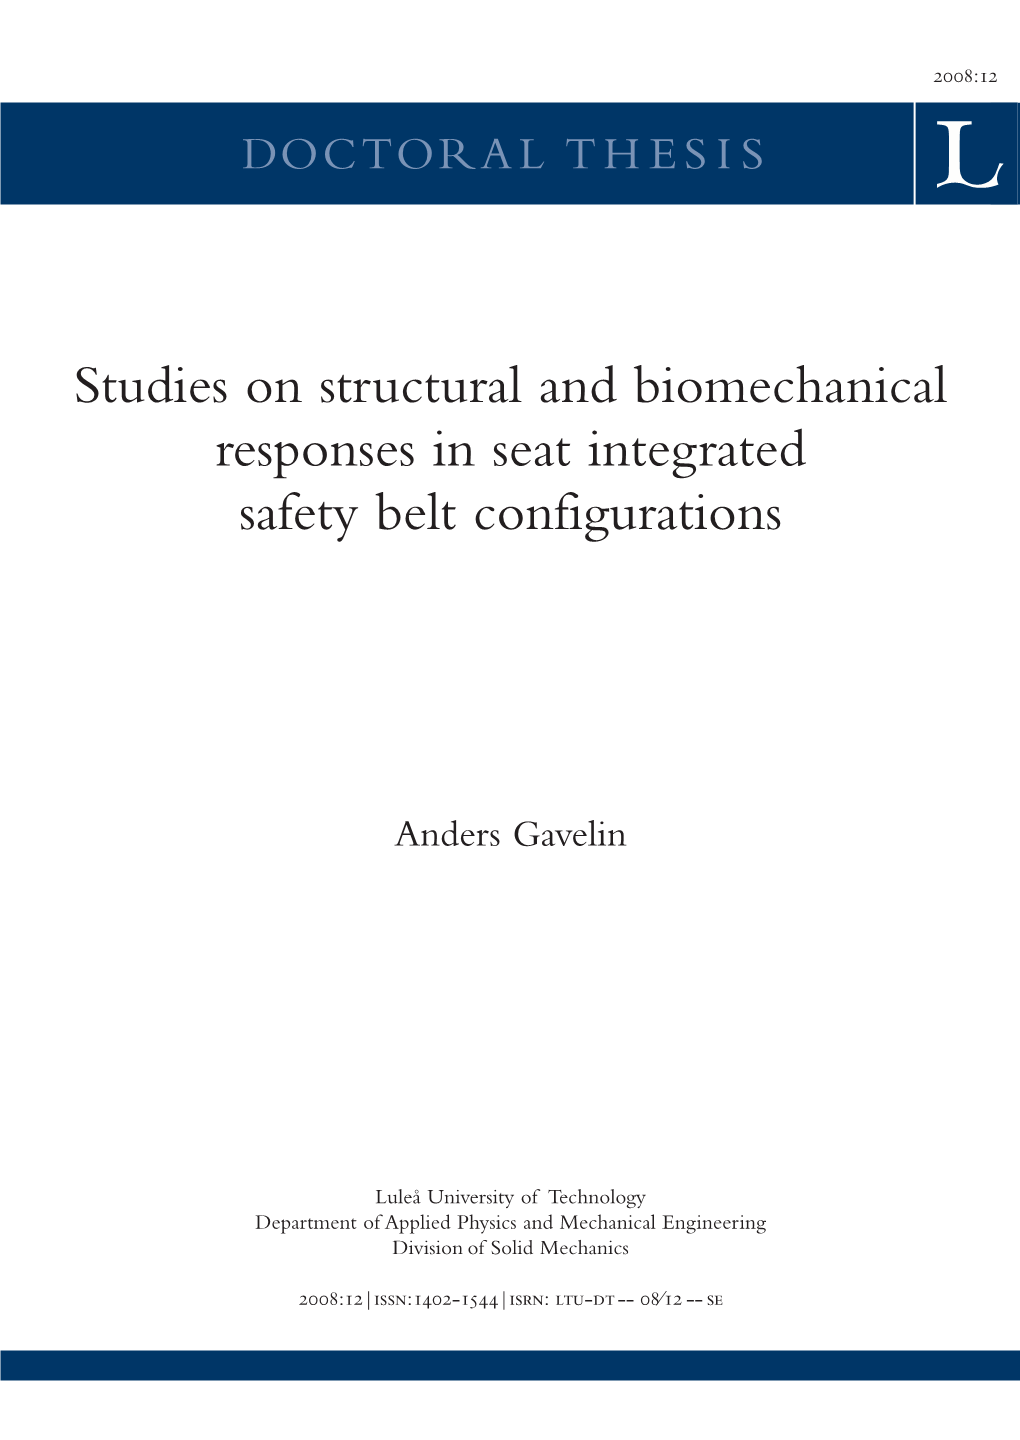 Studies on Structural and Biomechanical Responses in Seat